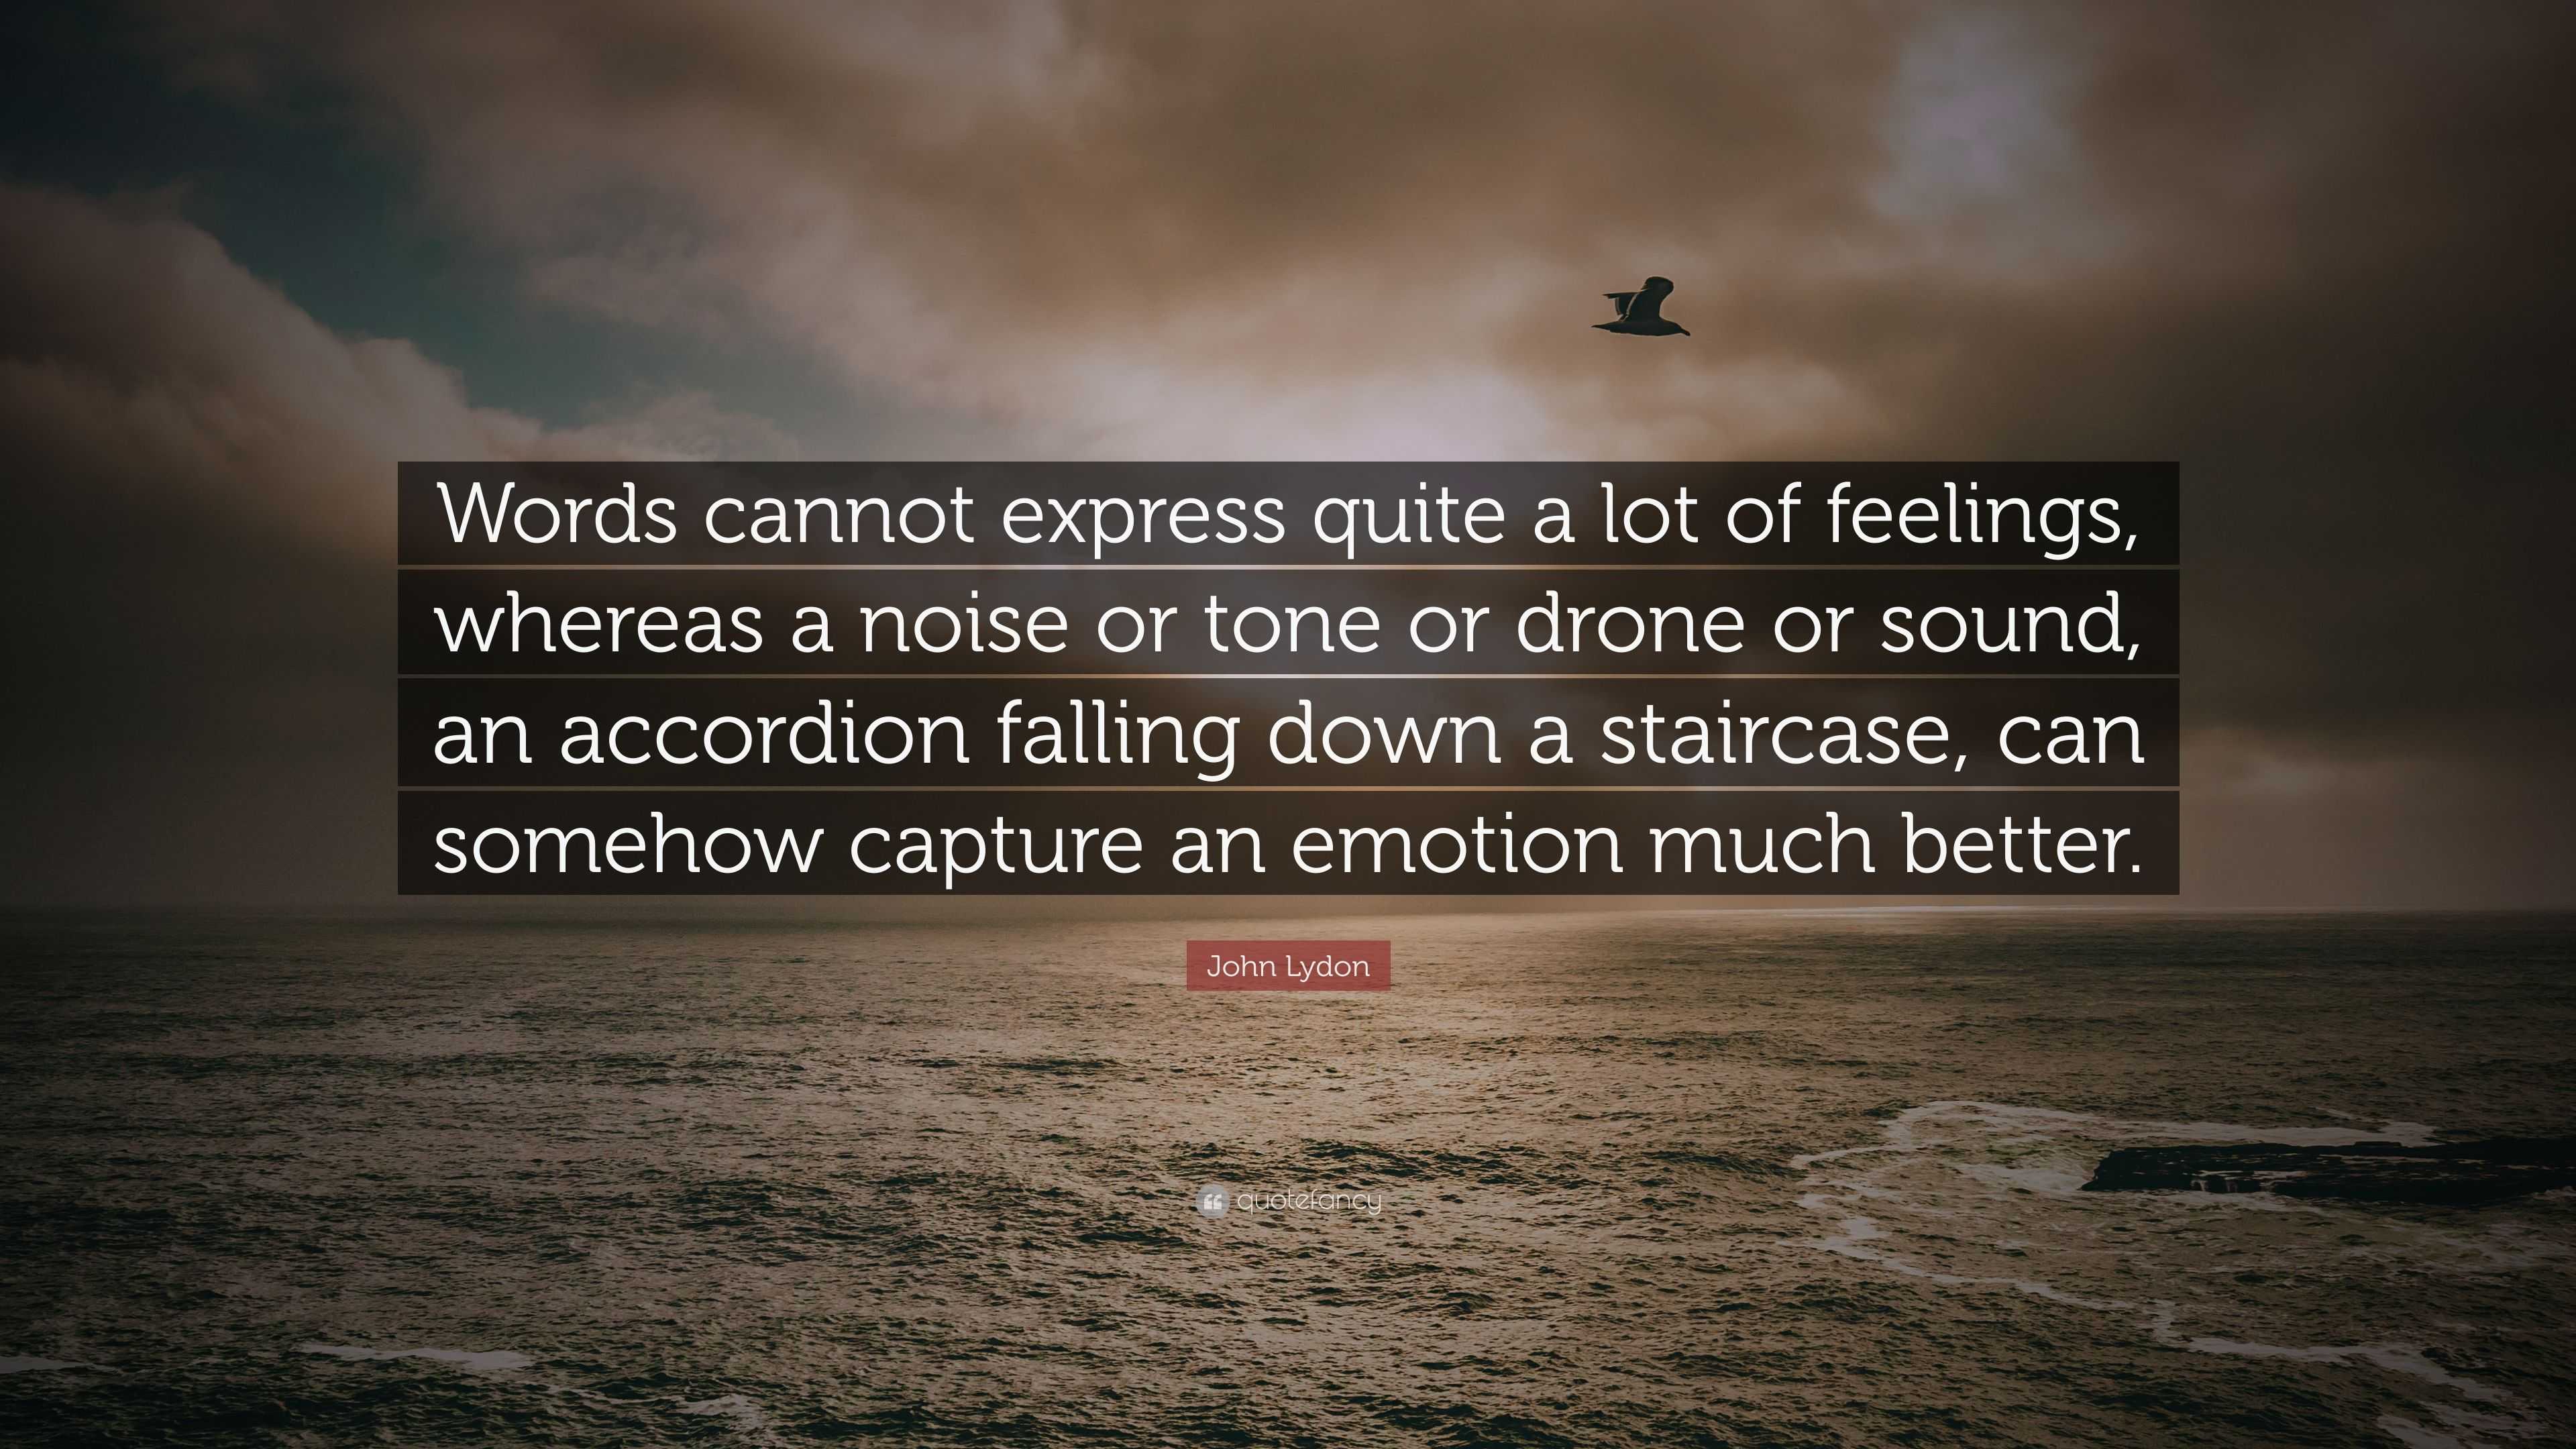 https://quotefancy.com/media/wallpaper/3840x2160/5548902-John-Lydon-Quote-Words-cannot-express-quite-a-lot-of-feelings.jpg